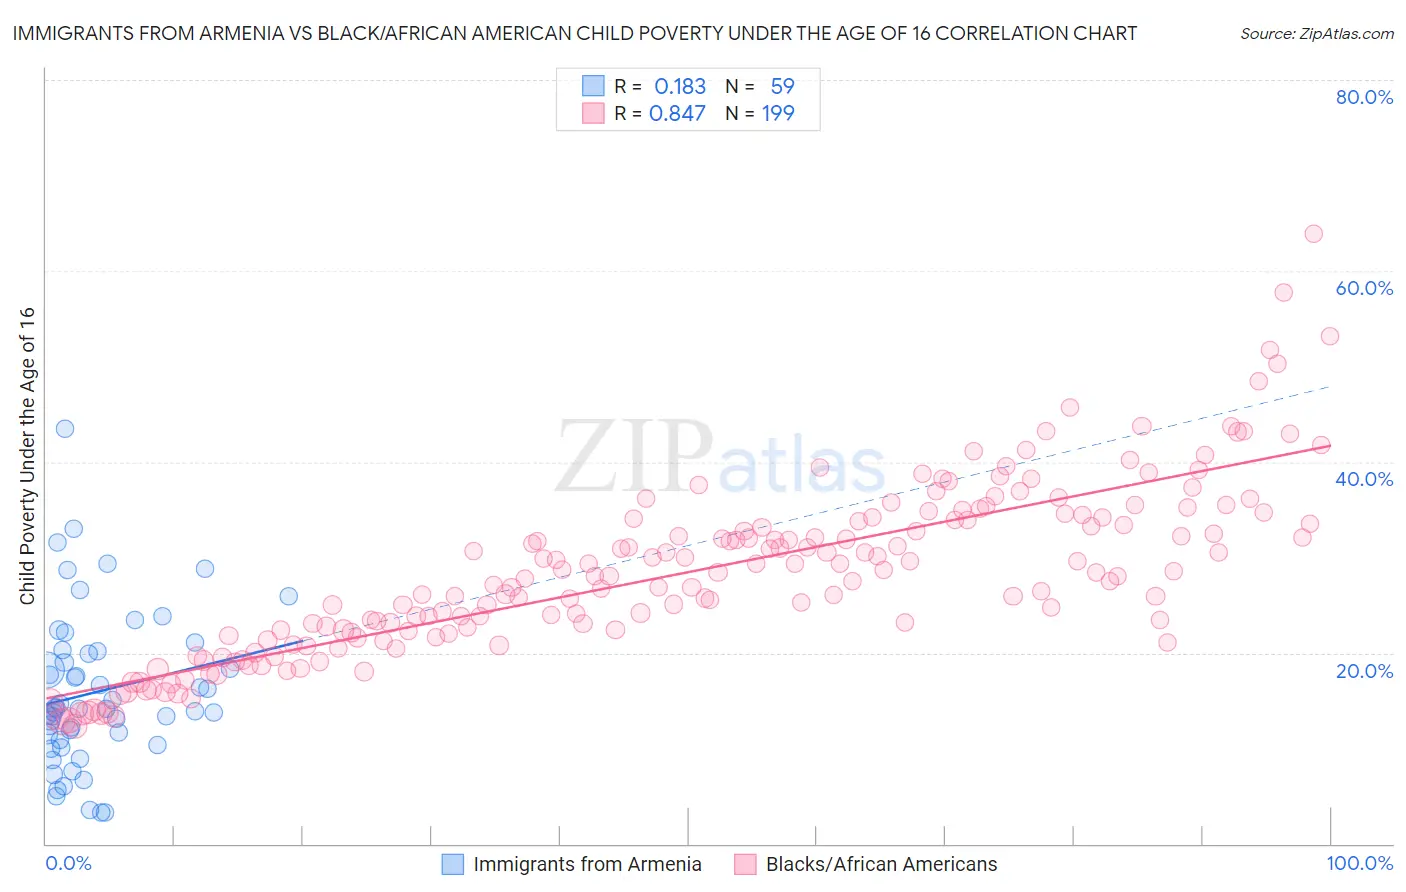 Immigrants from Armenia vs Black/African American Child Poverty Under the Age of 16